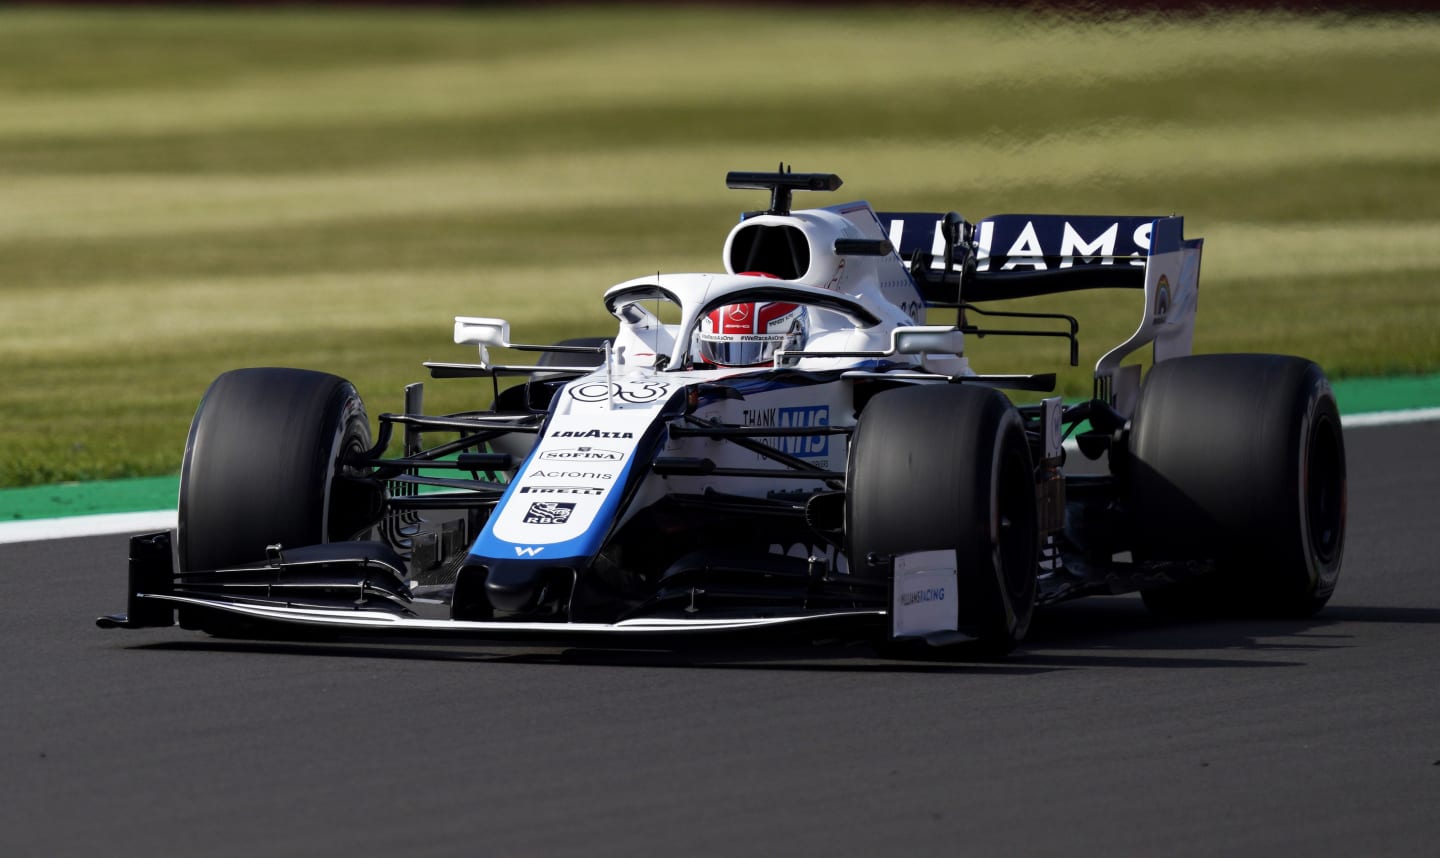 NORTHAMPTON, ENGLAND - JULY 31: George Russell of Great Britain driving the (63) Williams Racing FW43 Mercedes on track during practice for the F1 Grand Prix of Great Britain at Silverstone on July 31, 2020 in Northampton, England. (Photo by Will Oliver/Pool via Getty Images)